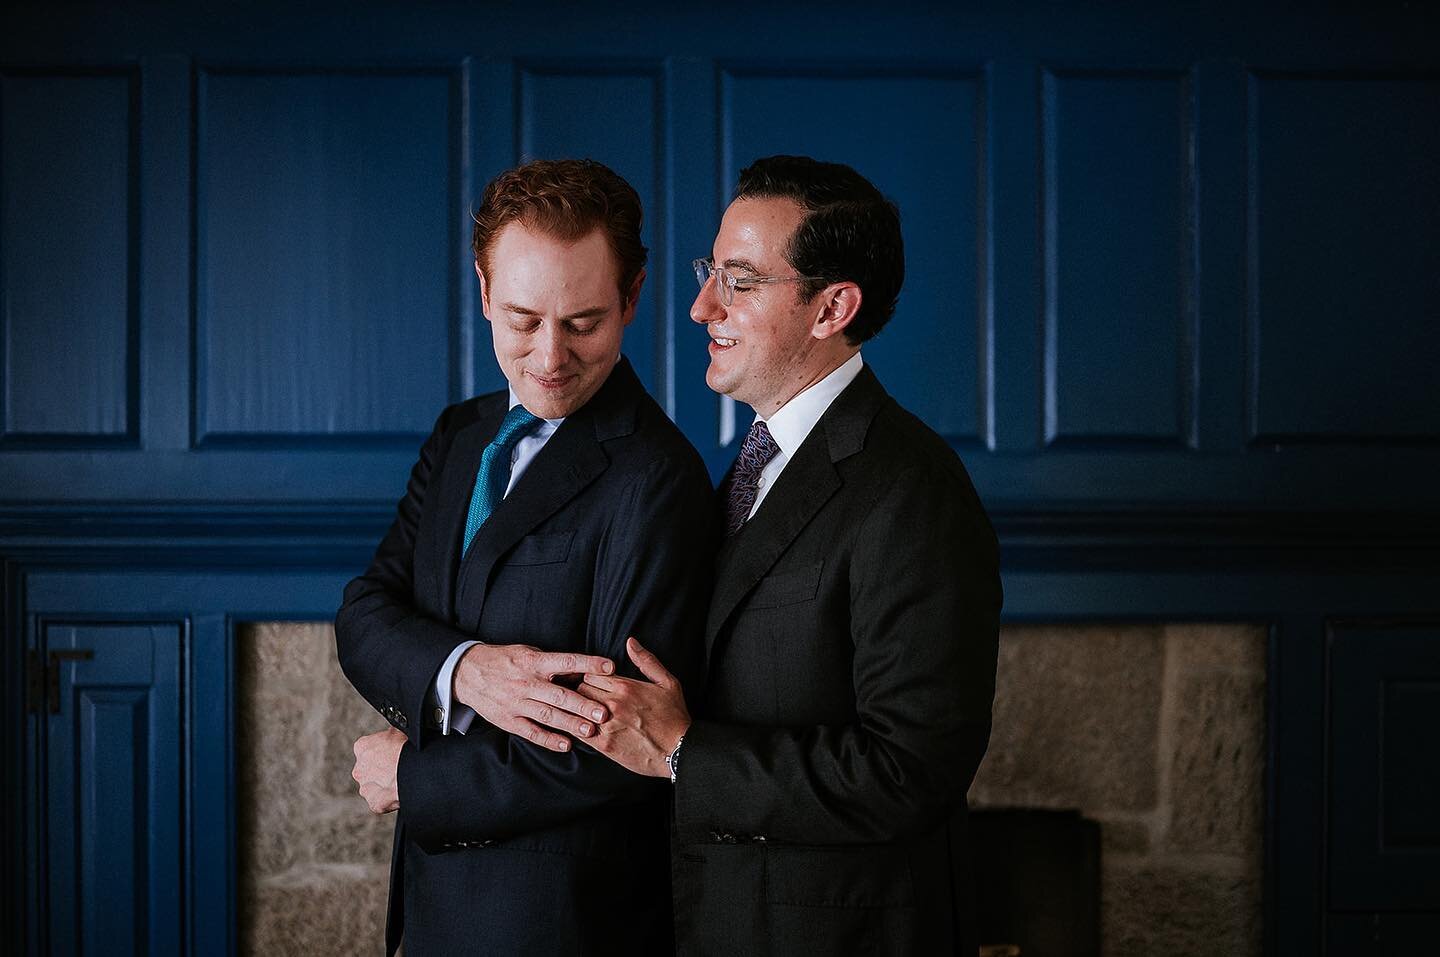 #wedding #connecticutwedding #connecticutgayweddingphotographer #gaywedding #connecticutweddingphotographer #loveislove #pride #twogrooms #gayweddingphotographer @esevents08